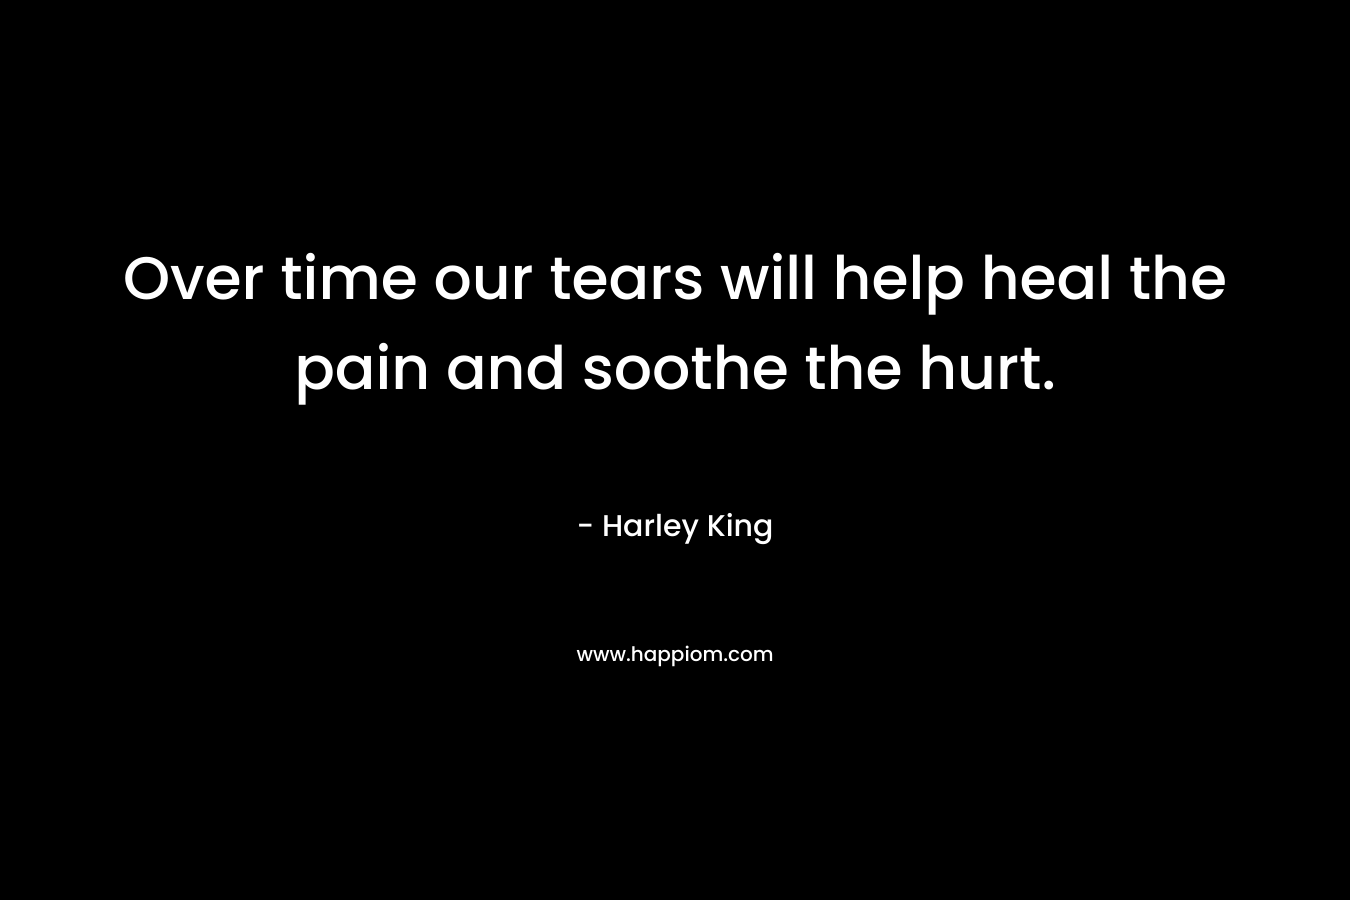 Over time our tears will help heal the pain and soothe the hurt.